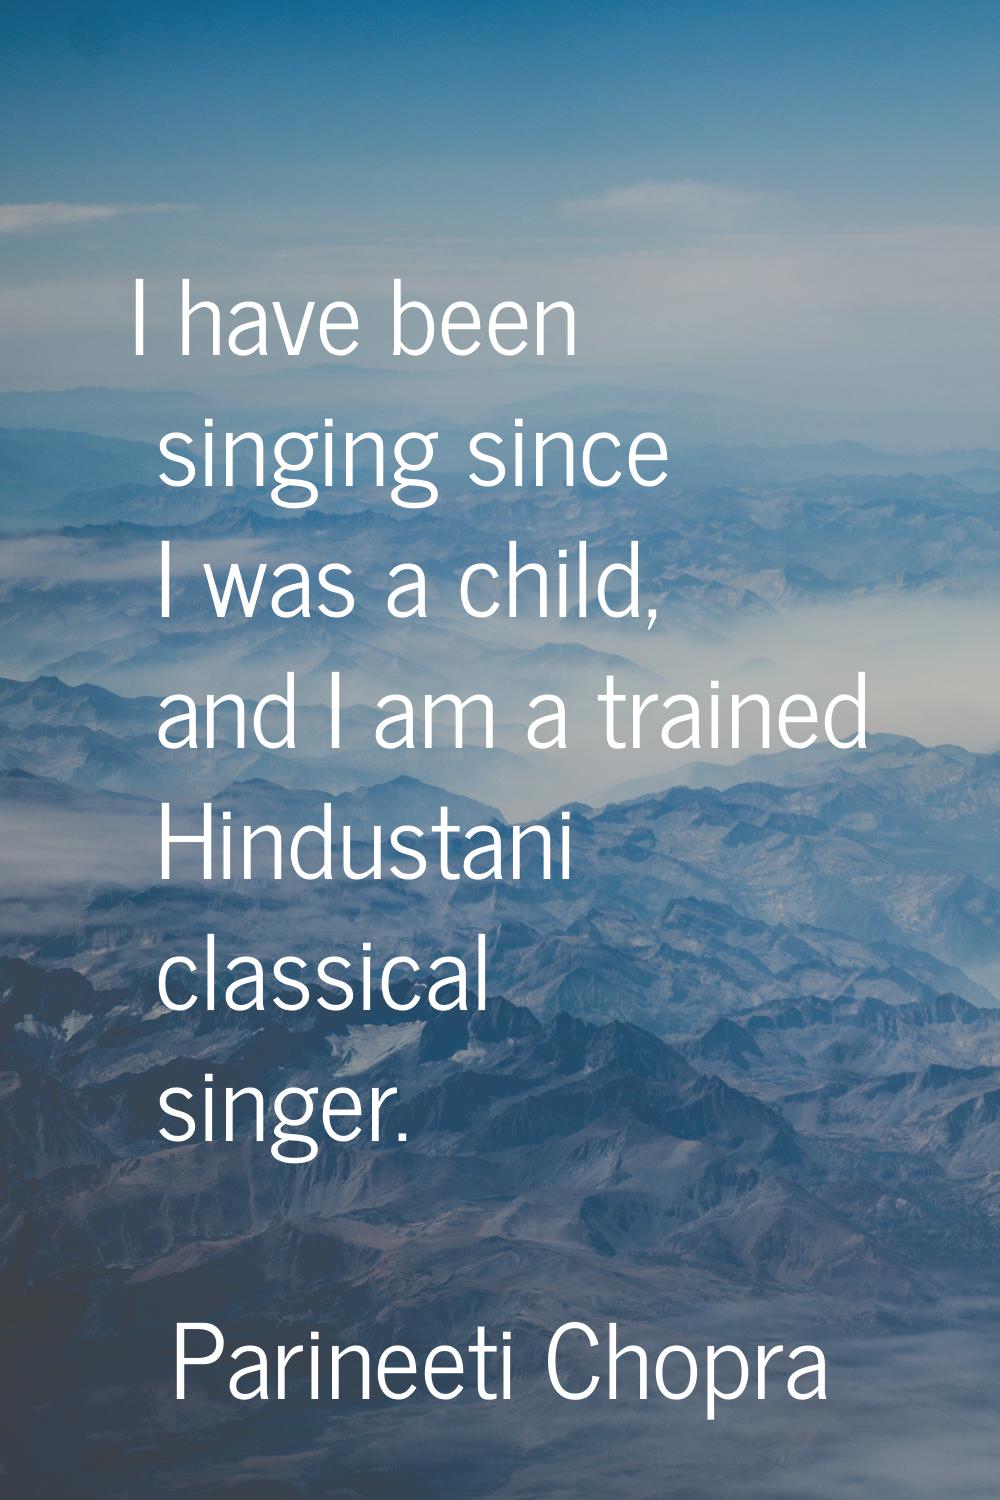 I have been singing since I was a child, and I am a trained Hindustani classical singer.